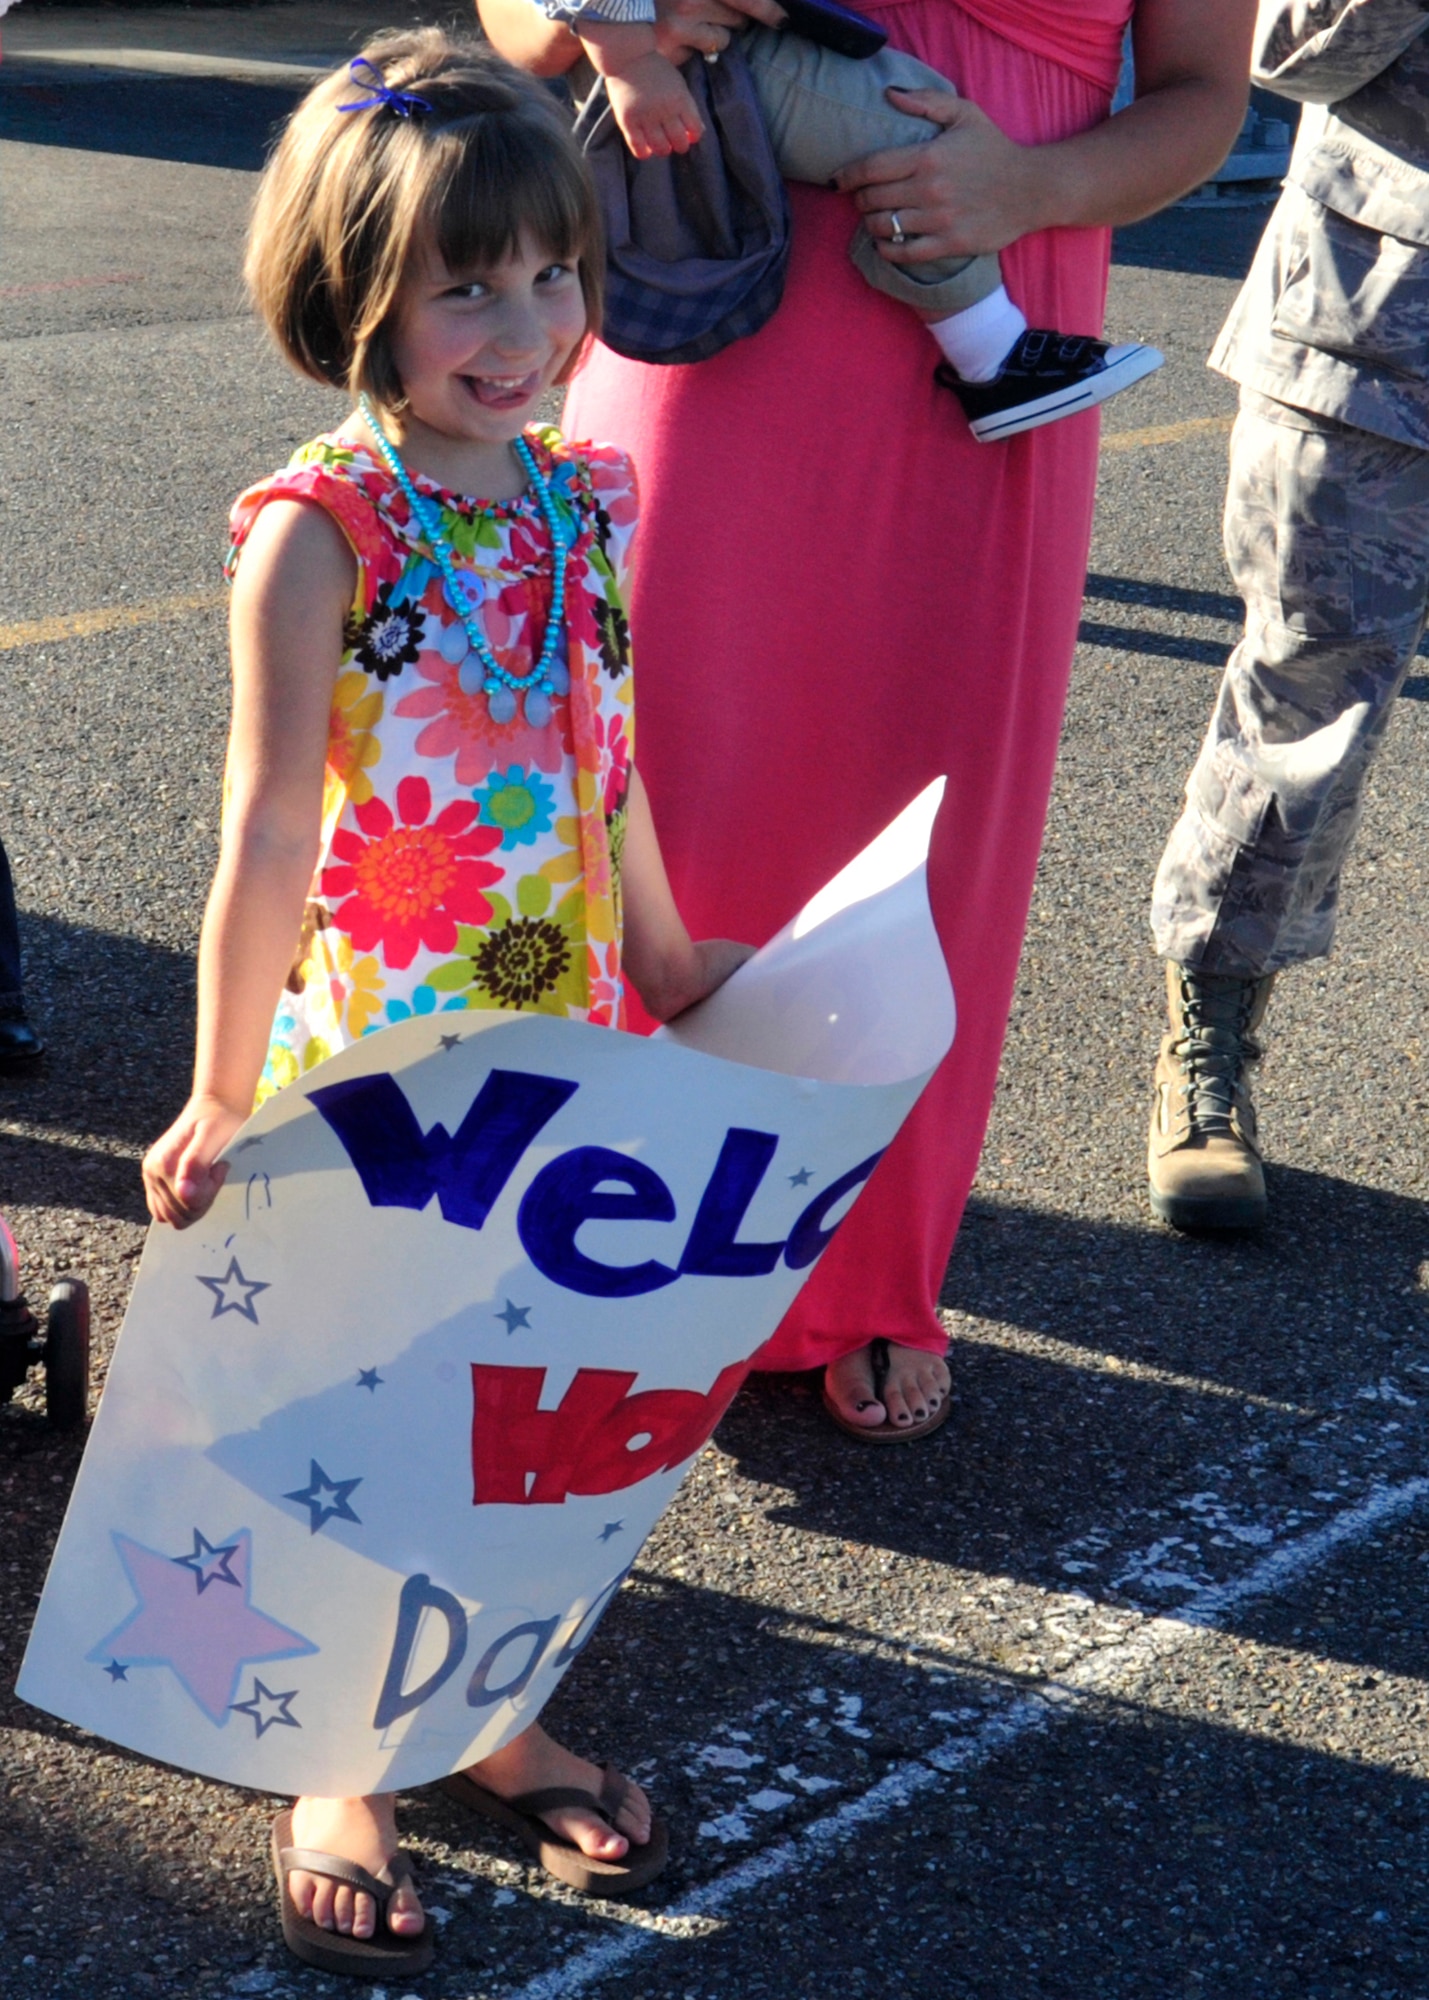 The daughter of Staff Sgt. Sean Sullivan, 10th Airlift Squadron, waits Sept. 1, 2011, at Joint Base Lewis-McChord, Wash., for the return of her dad from a 120-day deployment. The 10th AS was deployed as the 817th Expeditionary Airlift Squadron to an overseas contingency location in the Middle East. (U.S. Air Force Photo/Staff Sgt. Frances Kriss)